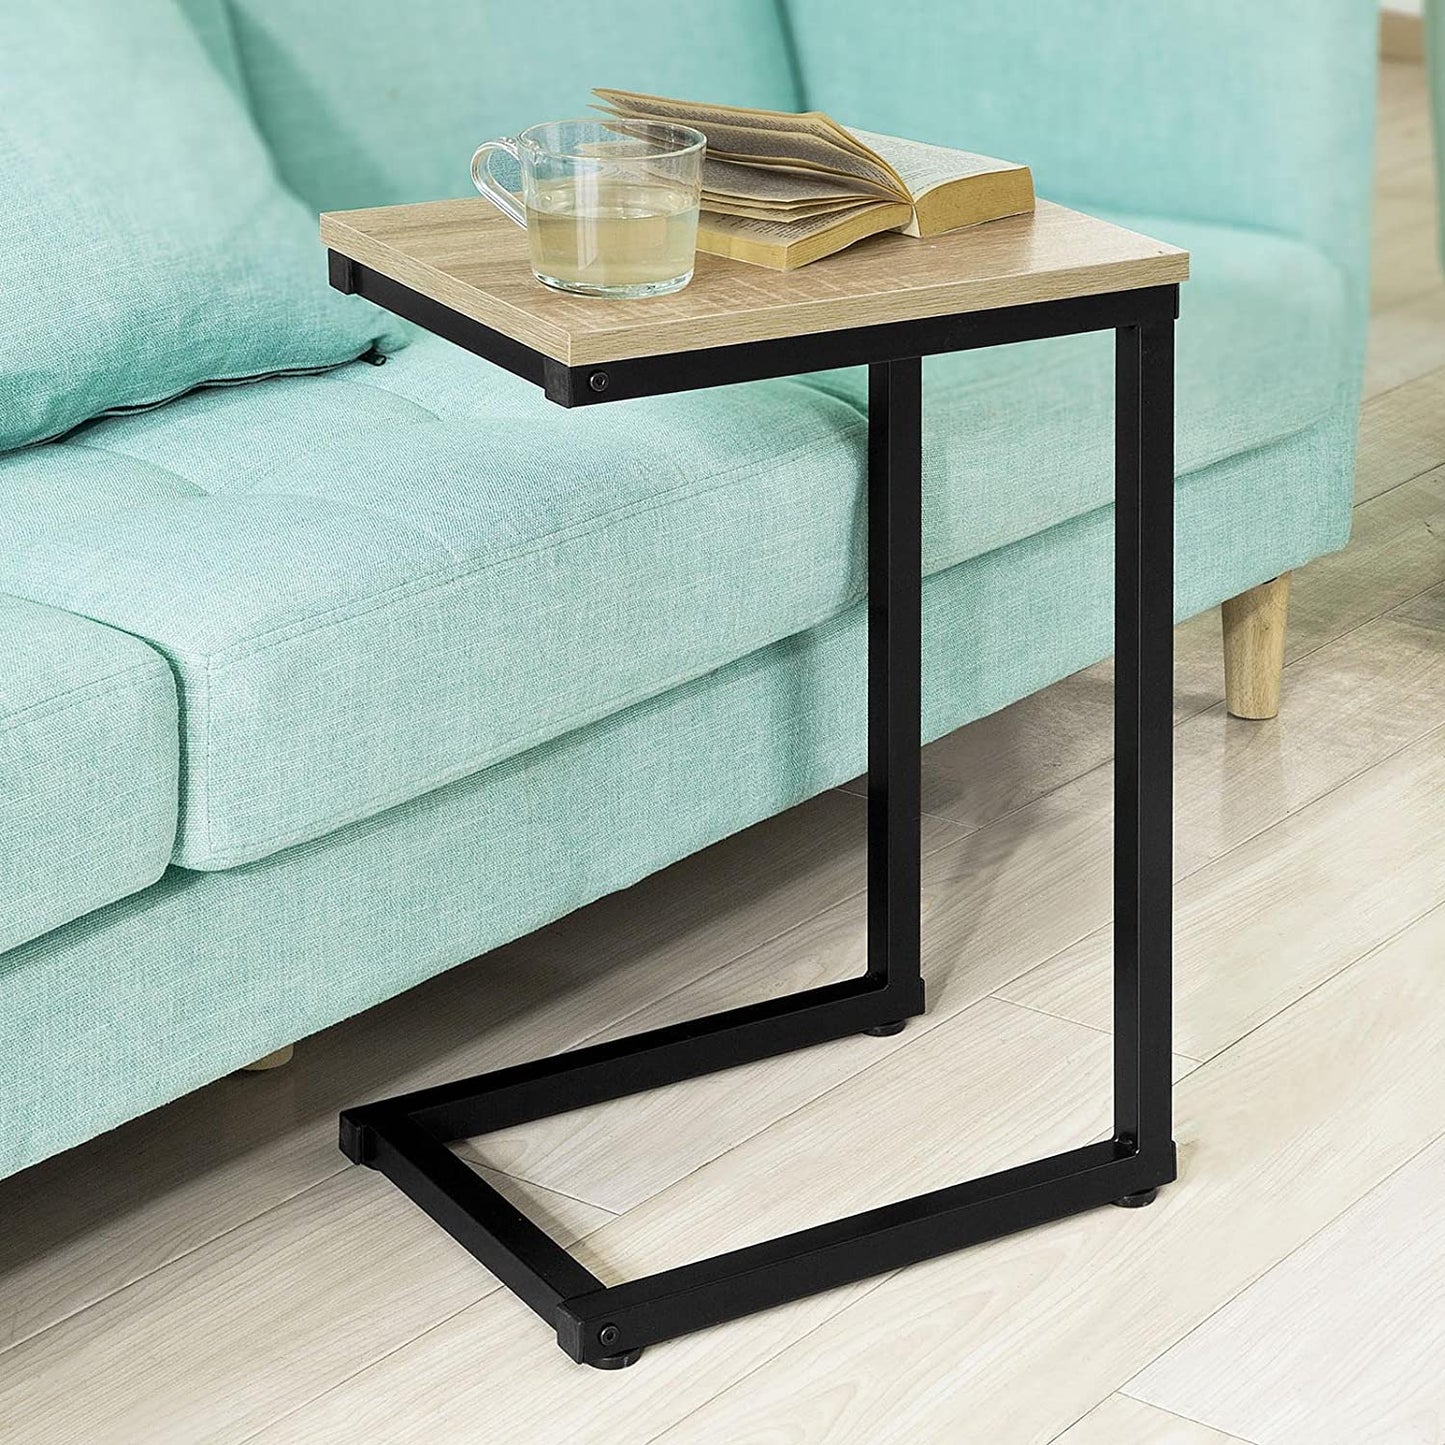 Sofa Side Table for Coffee time - image9